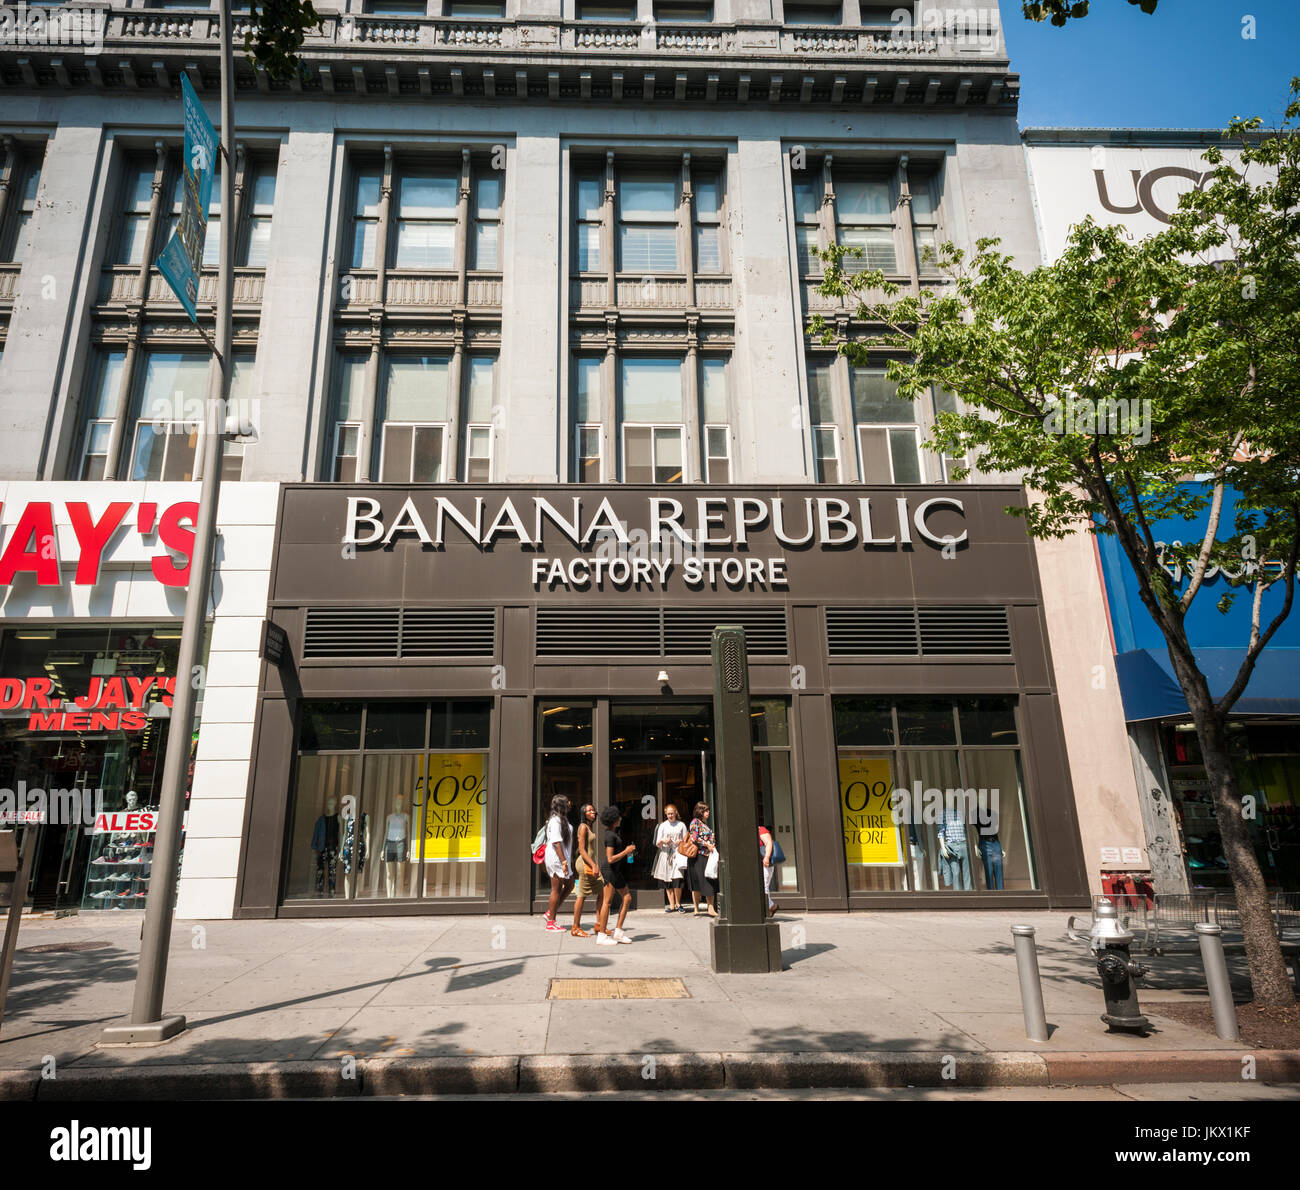 Banana Republic New York High Resolution Stock Photography and Images -  Alamy